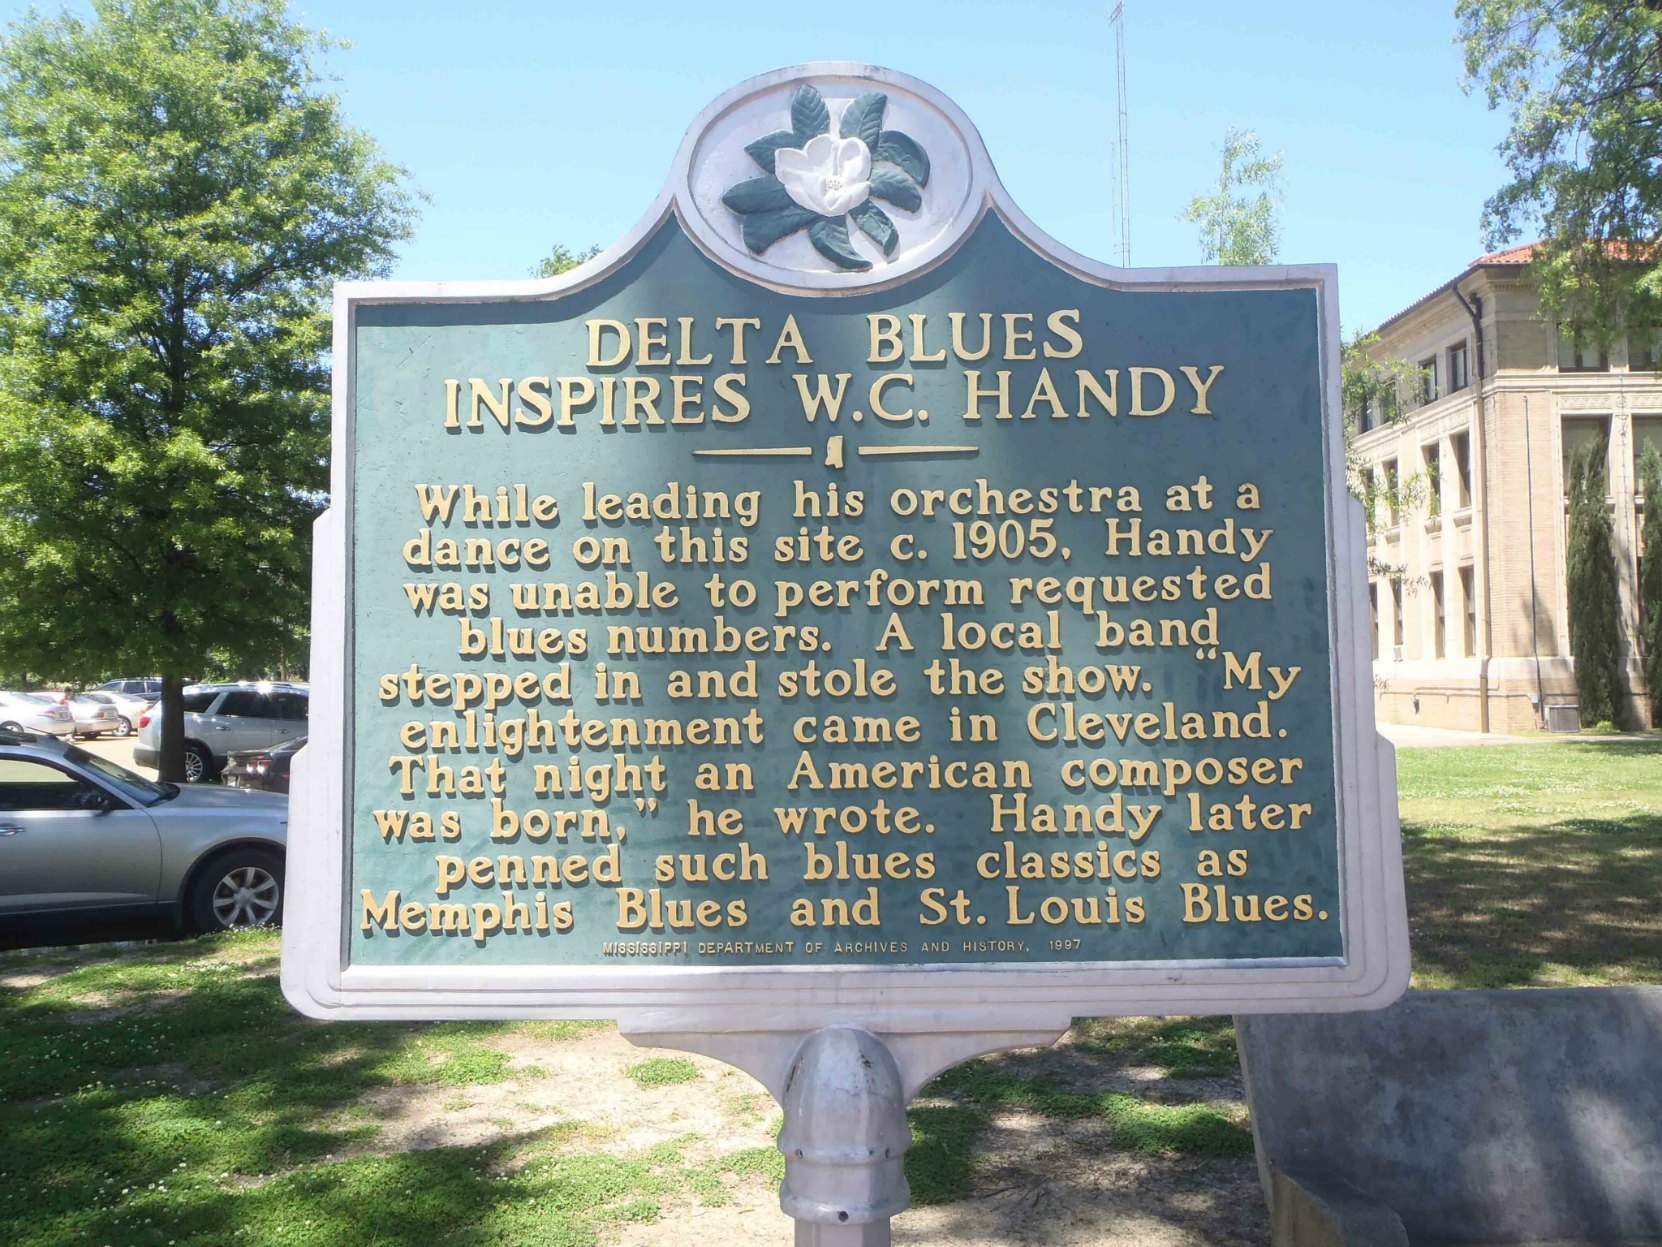 Mississippi Department of Archives & History marker commemorating Delta Blues Inspires W.C. Handy, outside the Bolivar County Courthouse, Cleveland, Mississippi